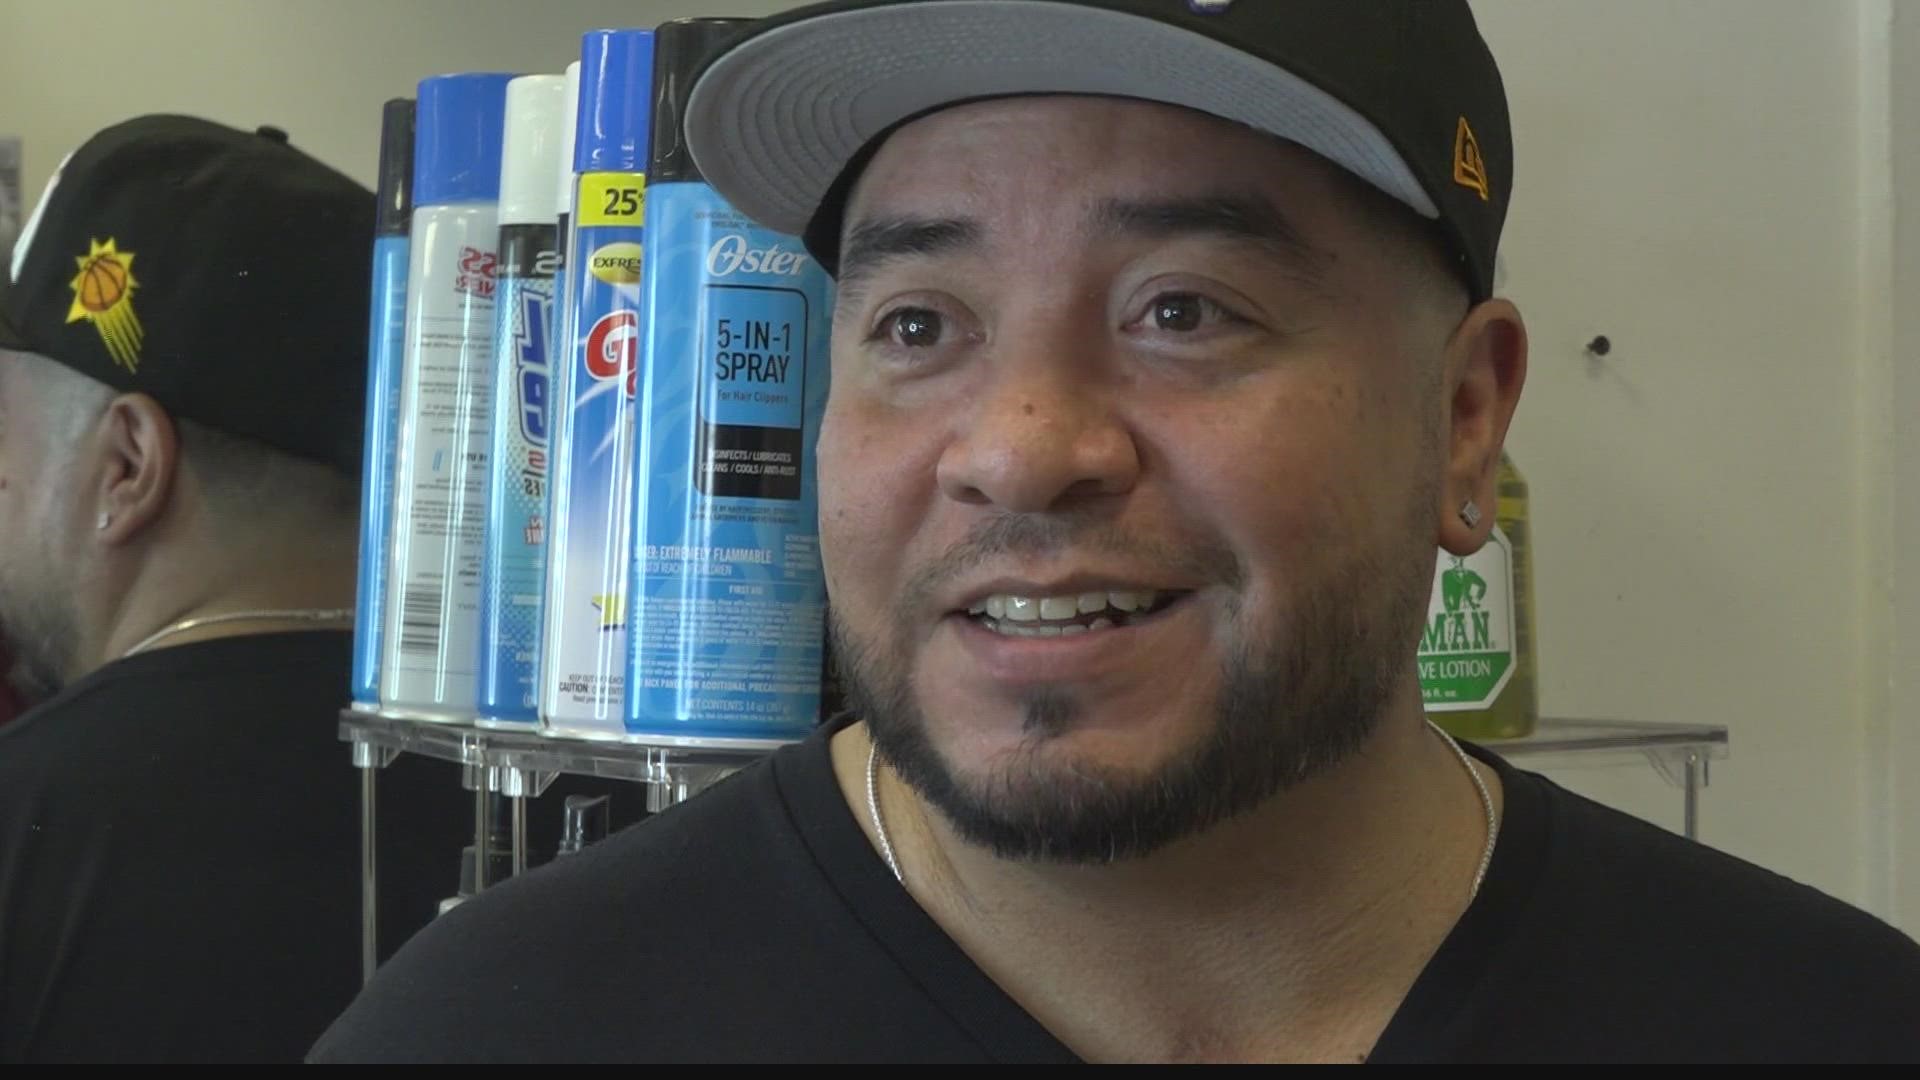 Elias Medina is a DJ and barber in the Valley. He ended up in the ICU with COVID-19 in the fall of 2021. Now, he's returning to work after a miraculous recovery.